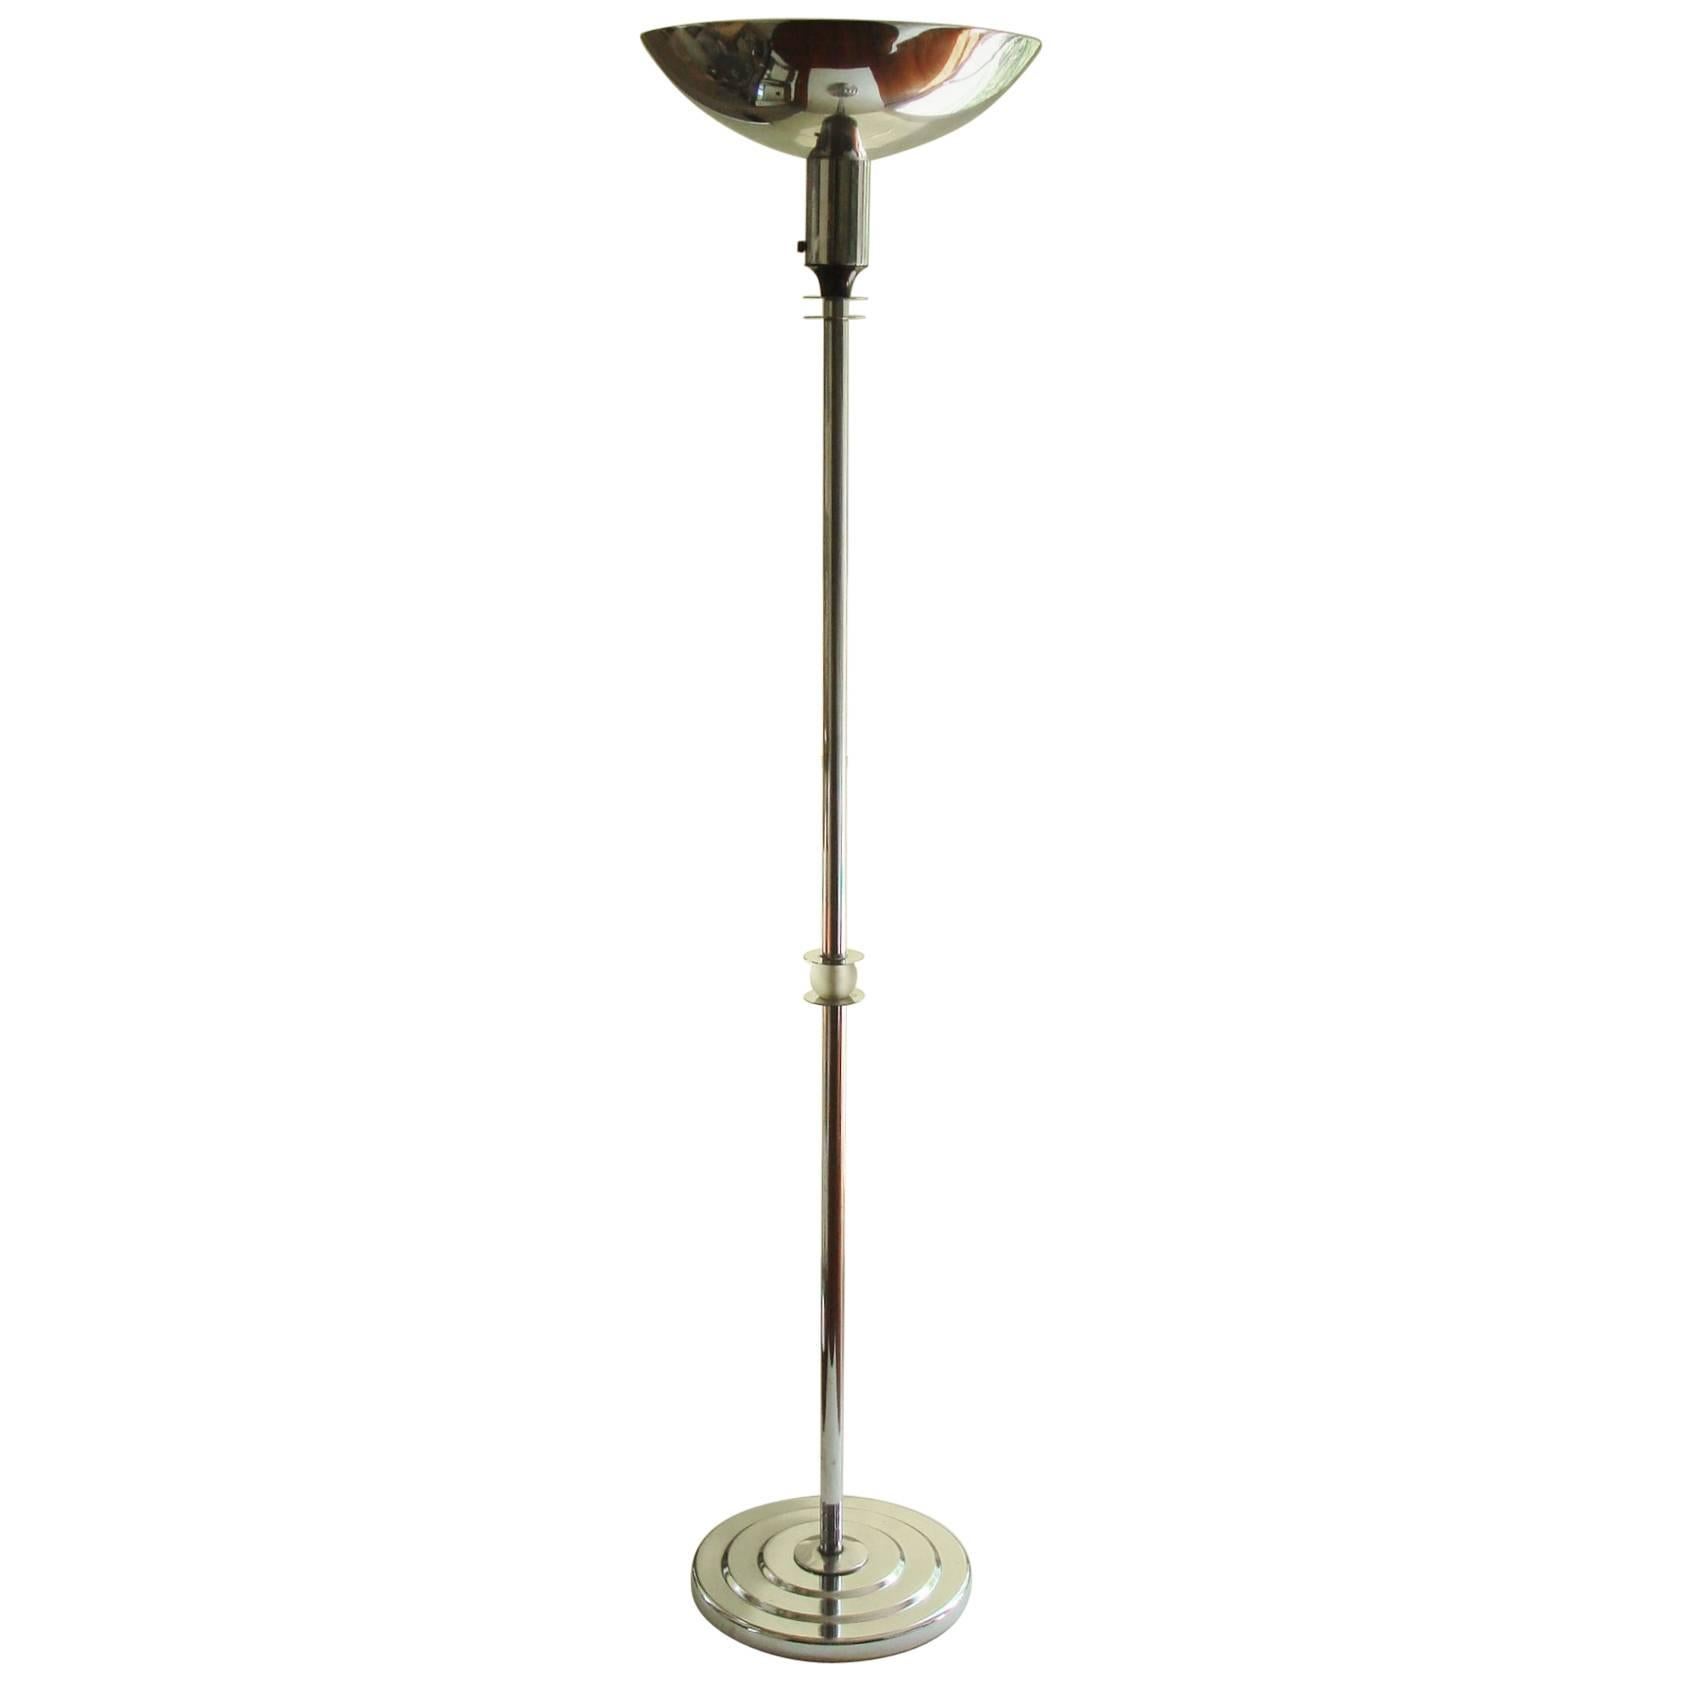 American Art Deco Chrome, Enamel and Frosted Glass Floor Uplighter/Torchiere For Sale